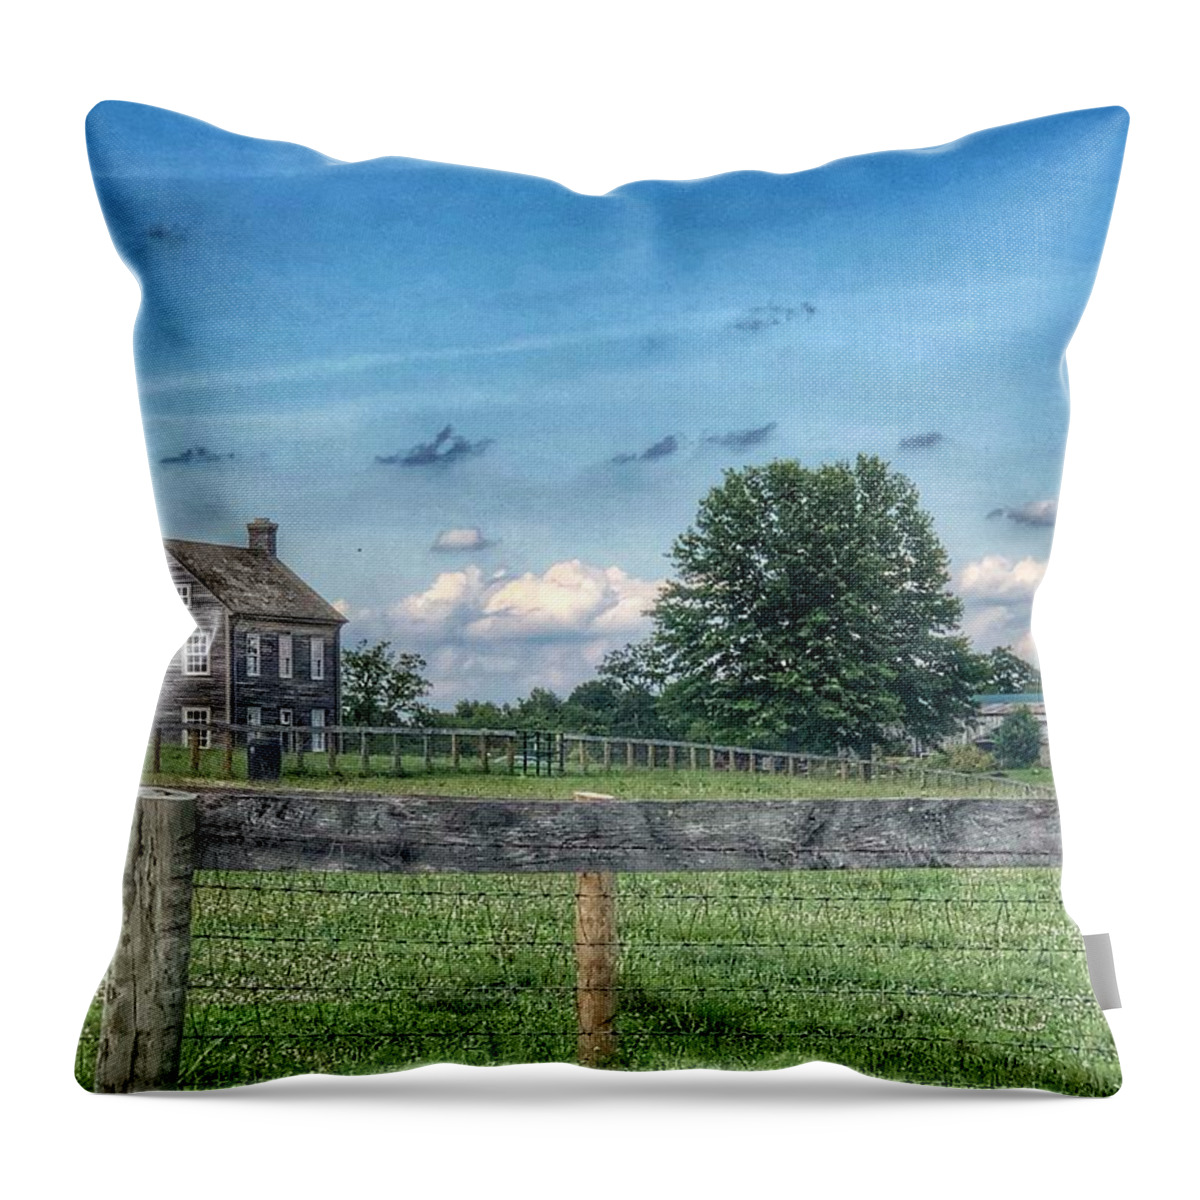 Farmhouse Throw Pillow featuring the photograph Old Farmhouse by Sumoflam Photography